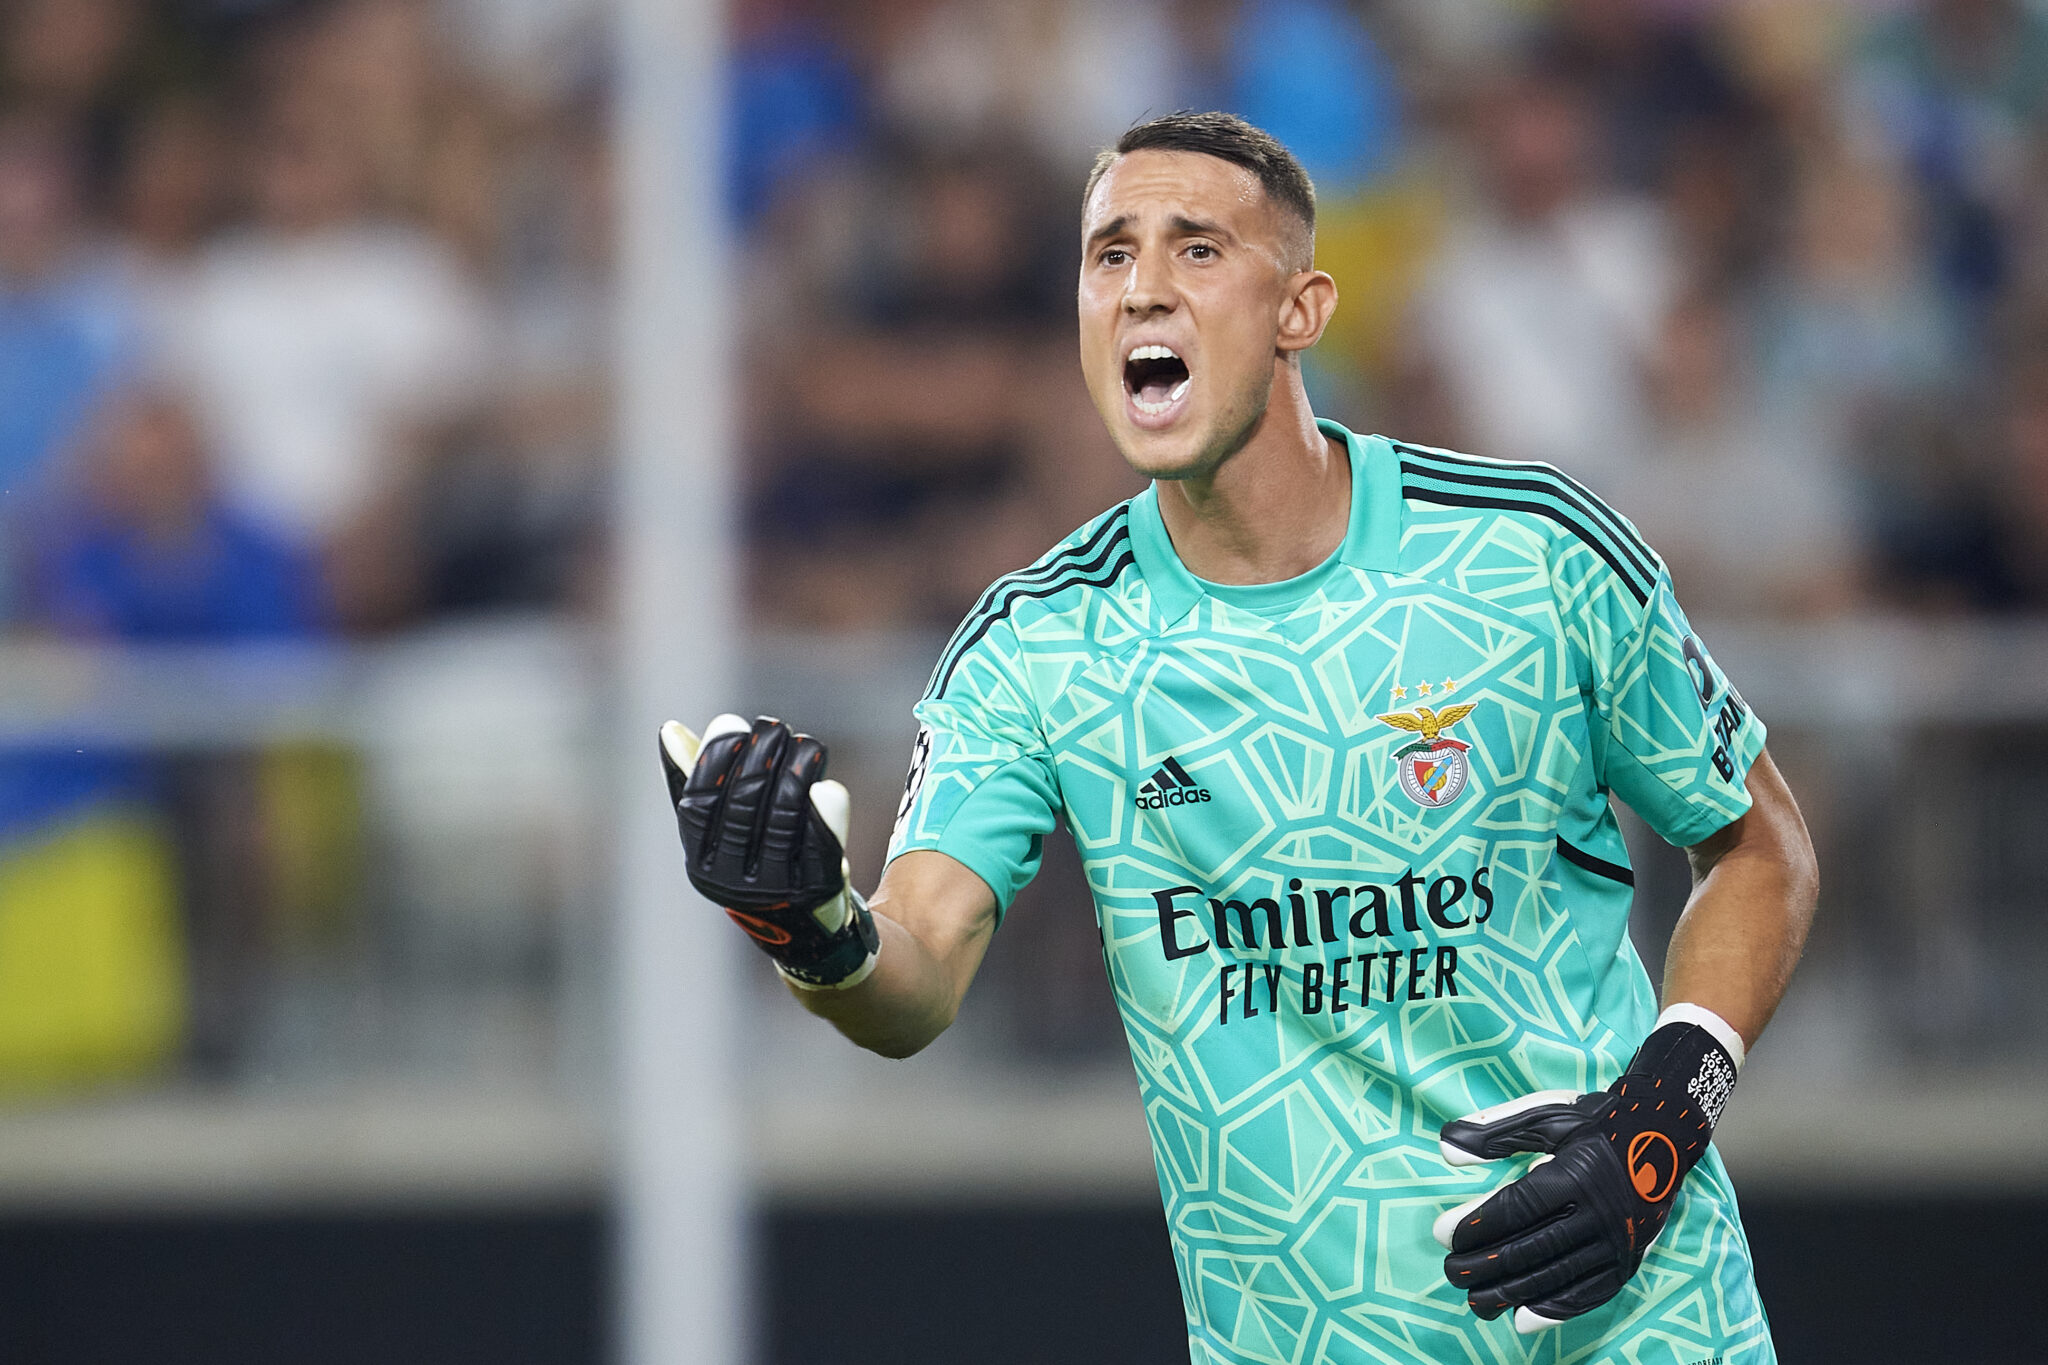 Man Utd set to miss out on Odysseas Vlachodimos, keeper set to sign new Benfica contract - Bóng Đá